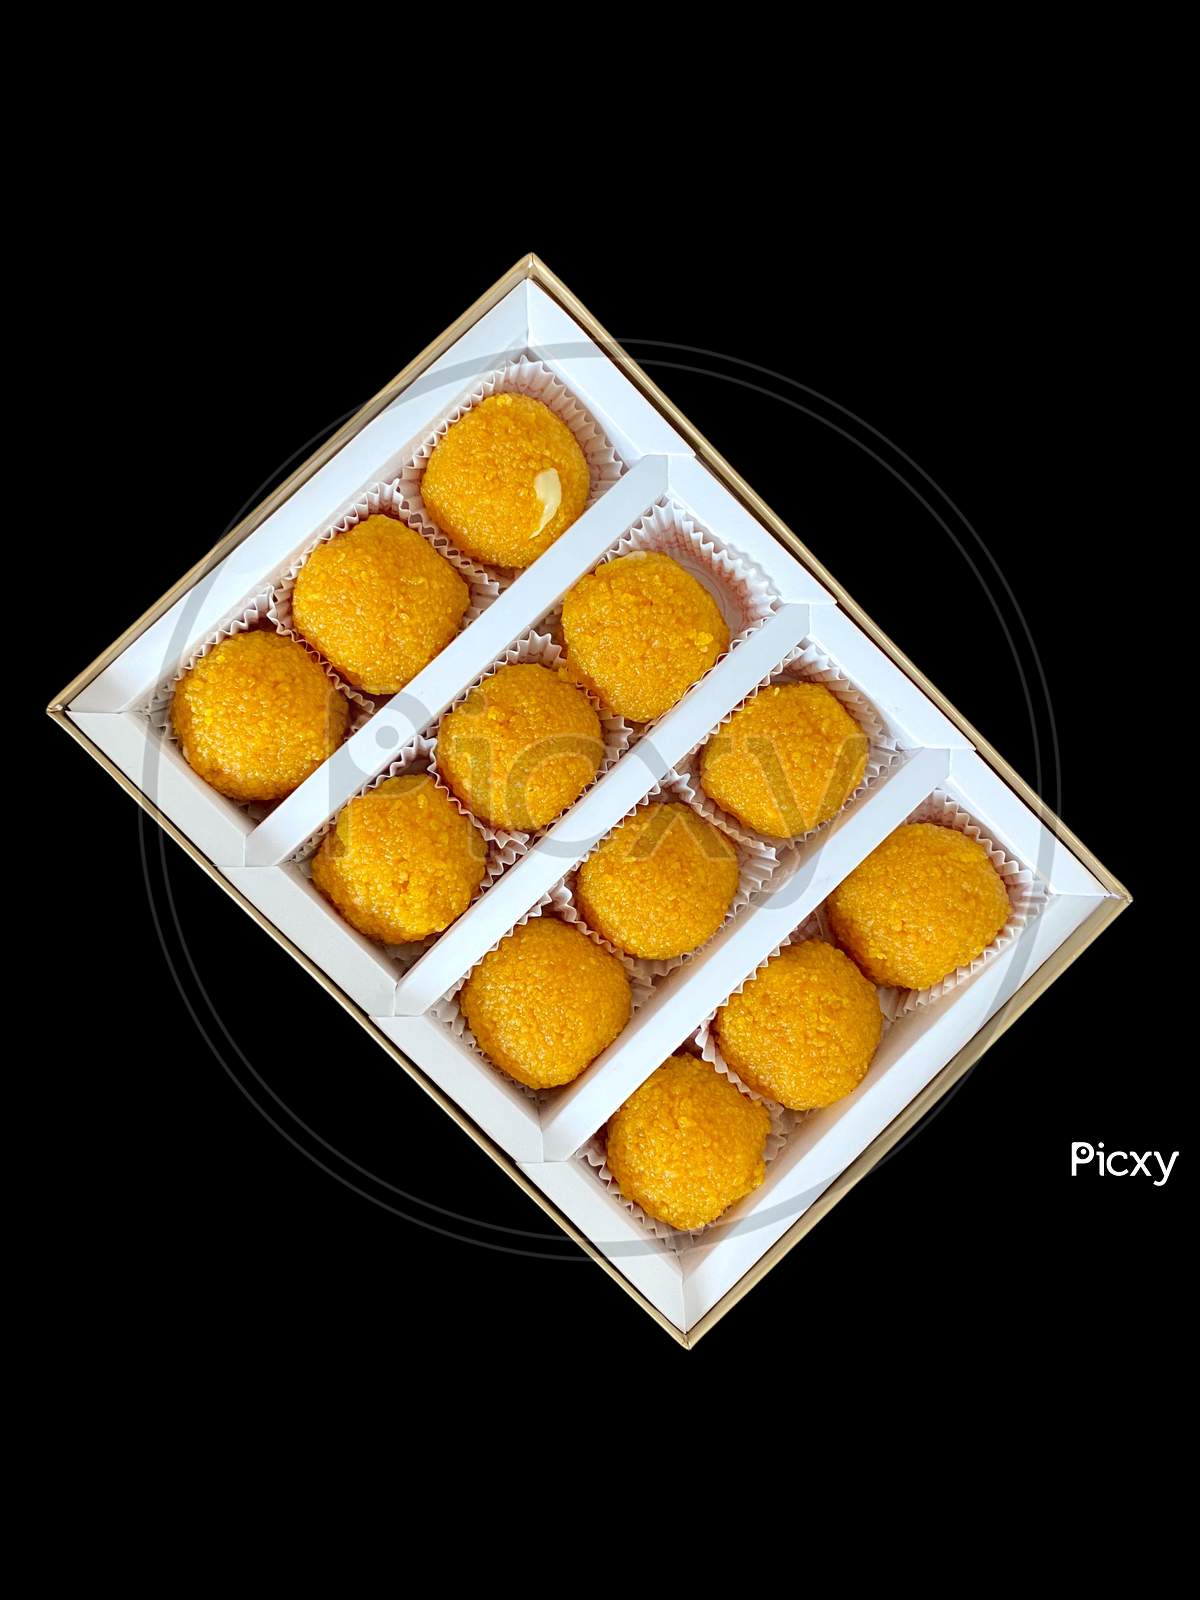 Moti Chor ke Laddu being served its must for all kinds of festivals in India